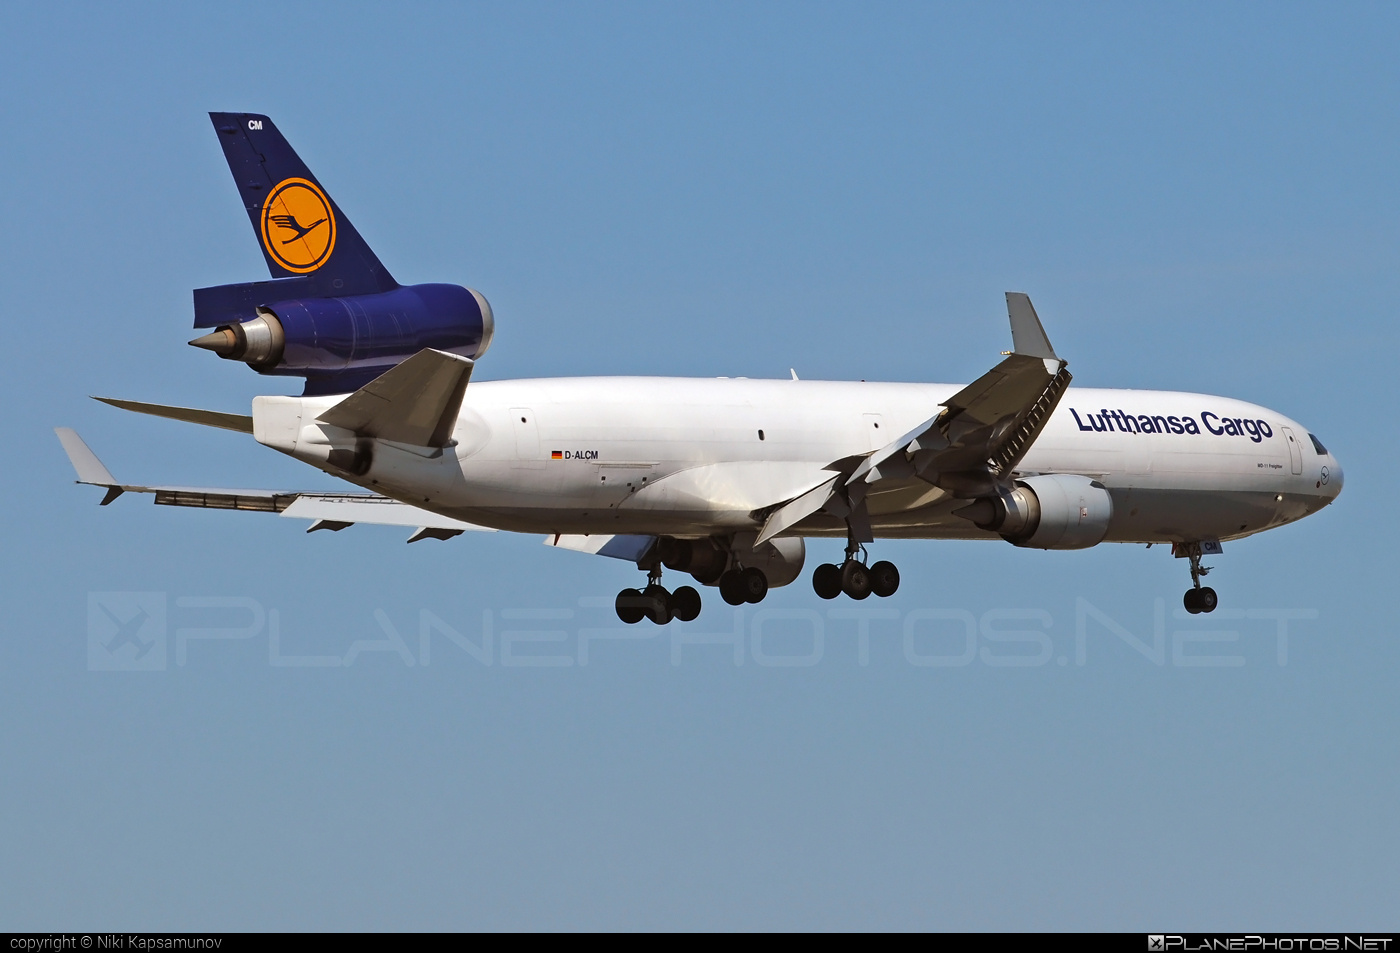 McDonnell Douglas MD-11F - D-ALCM operated by Lufthansa Cargo #lufthansa #lufthansacargo #mcDonnellDouglas #mcdonnelldouglas11 #mcdonnelldouglas11f #mcdonnelldouglasmd11 #mcdonnelldouglasmd11f #md11 #md11f